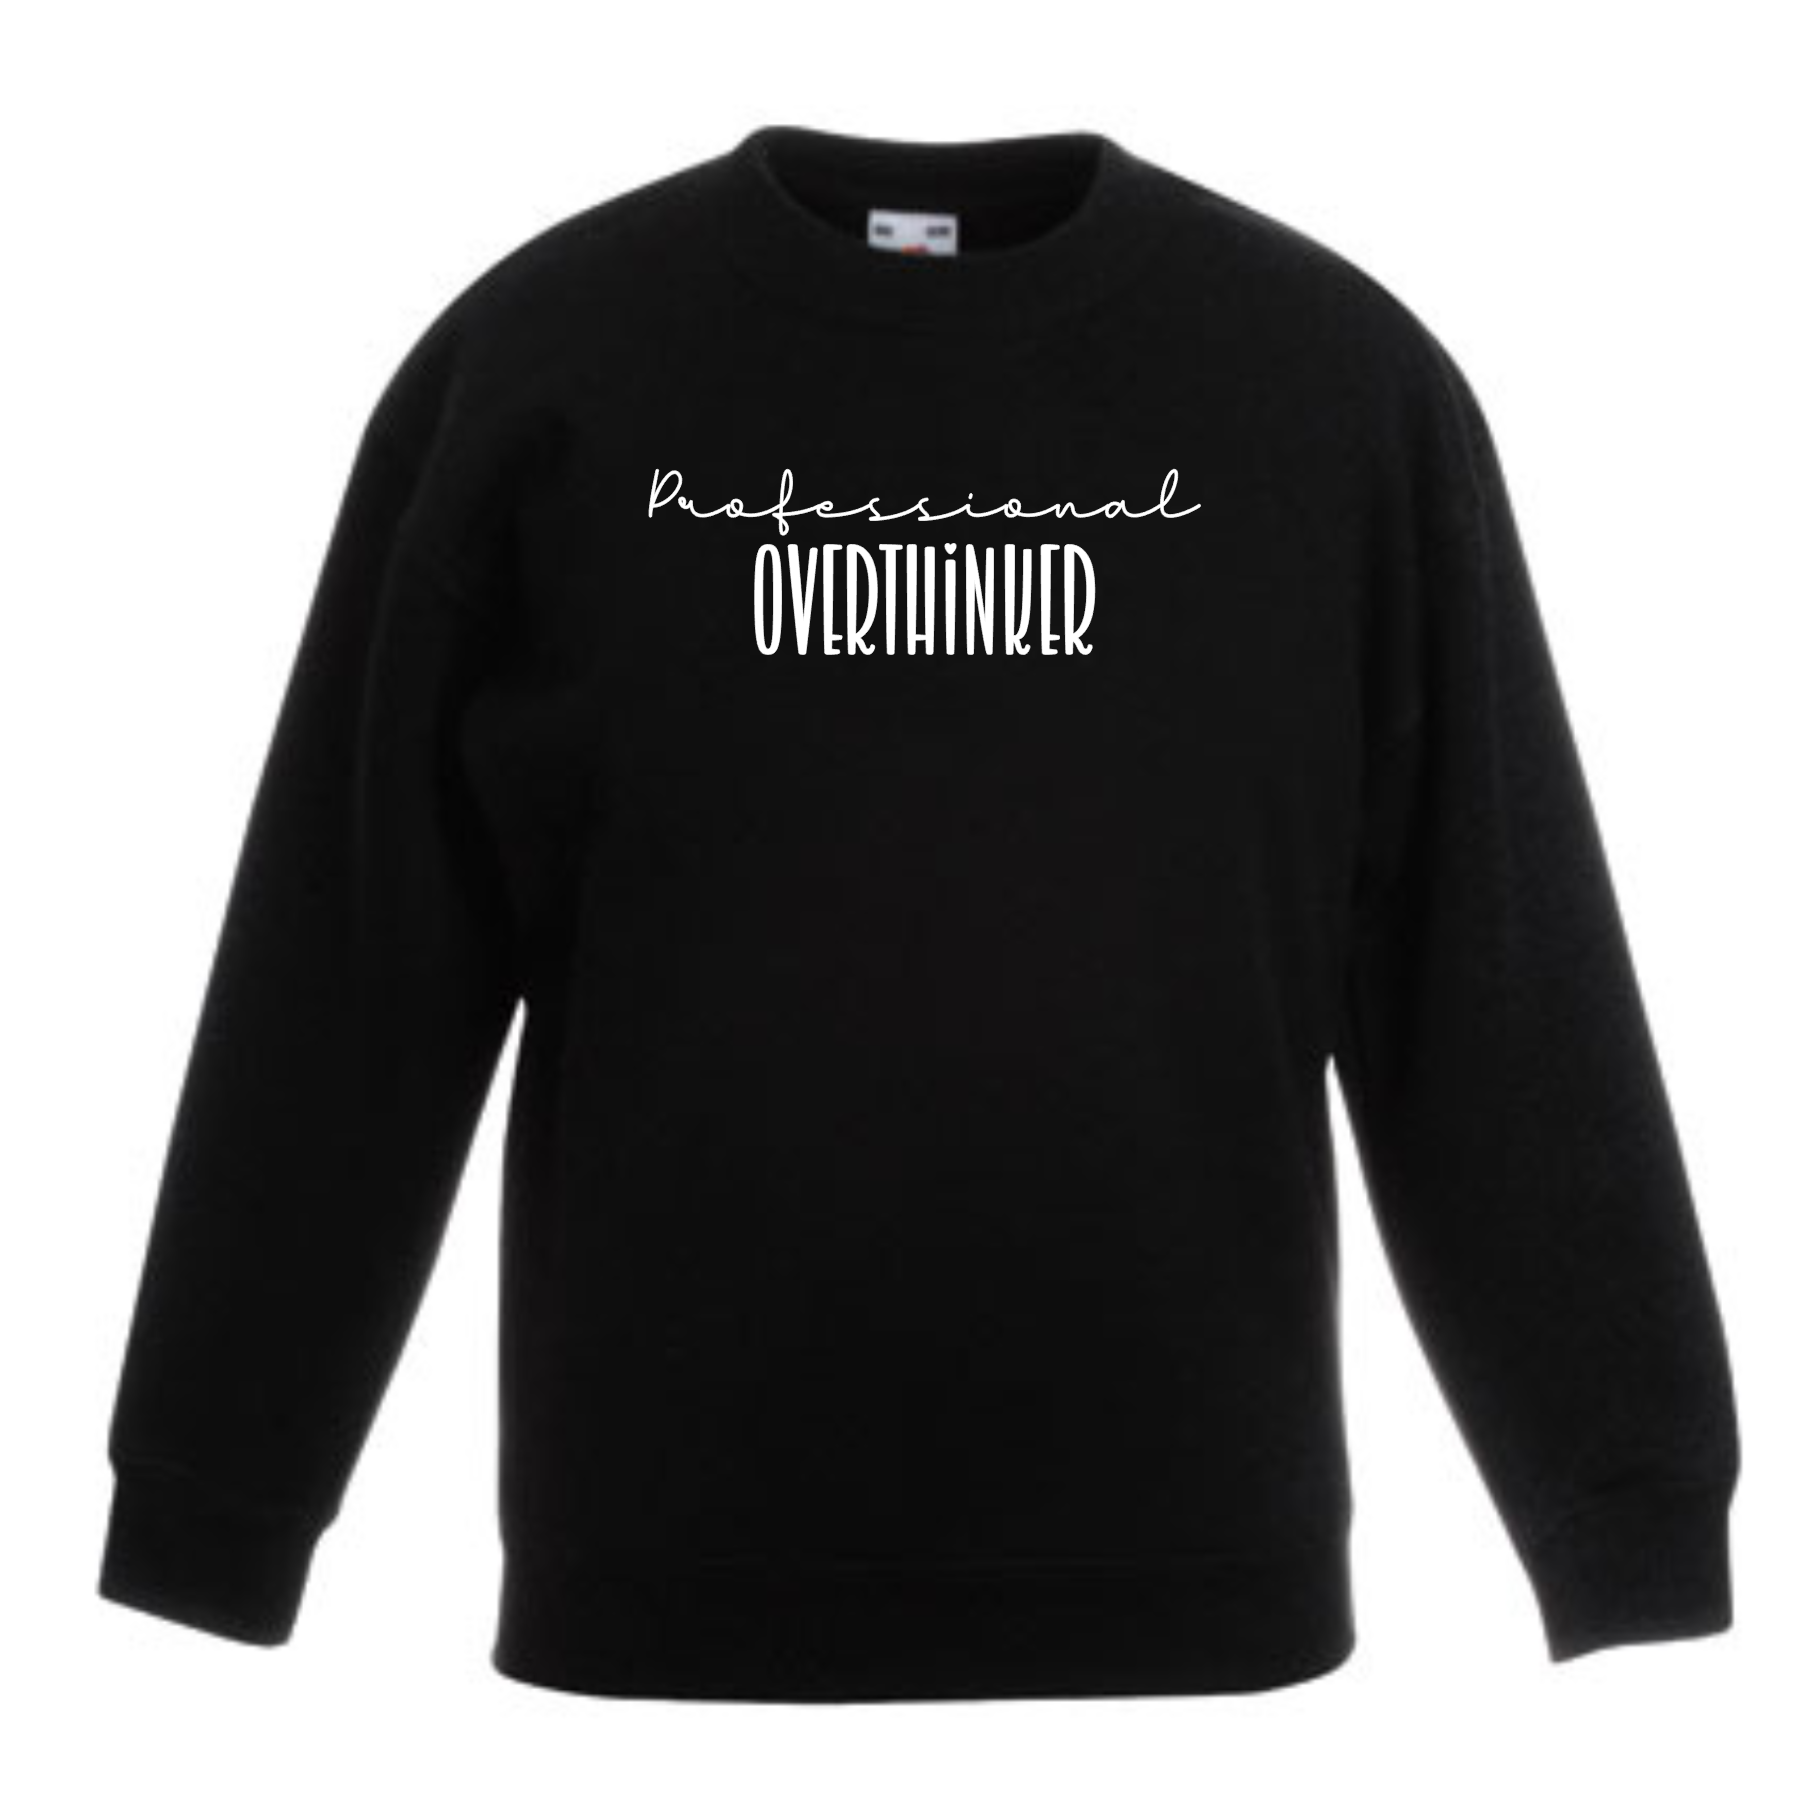 Sweater | Proffesional overthinker